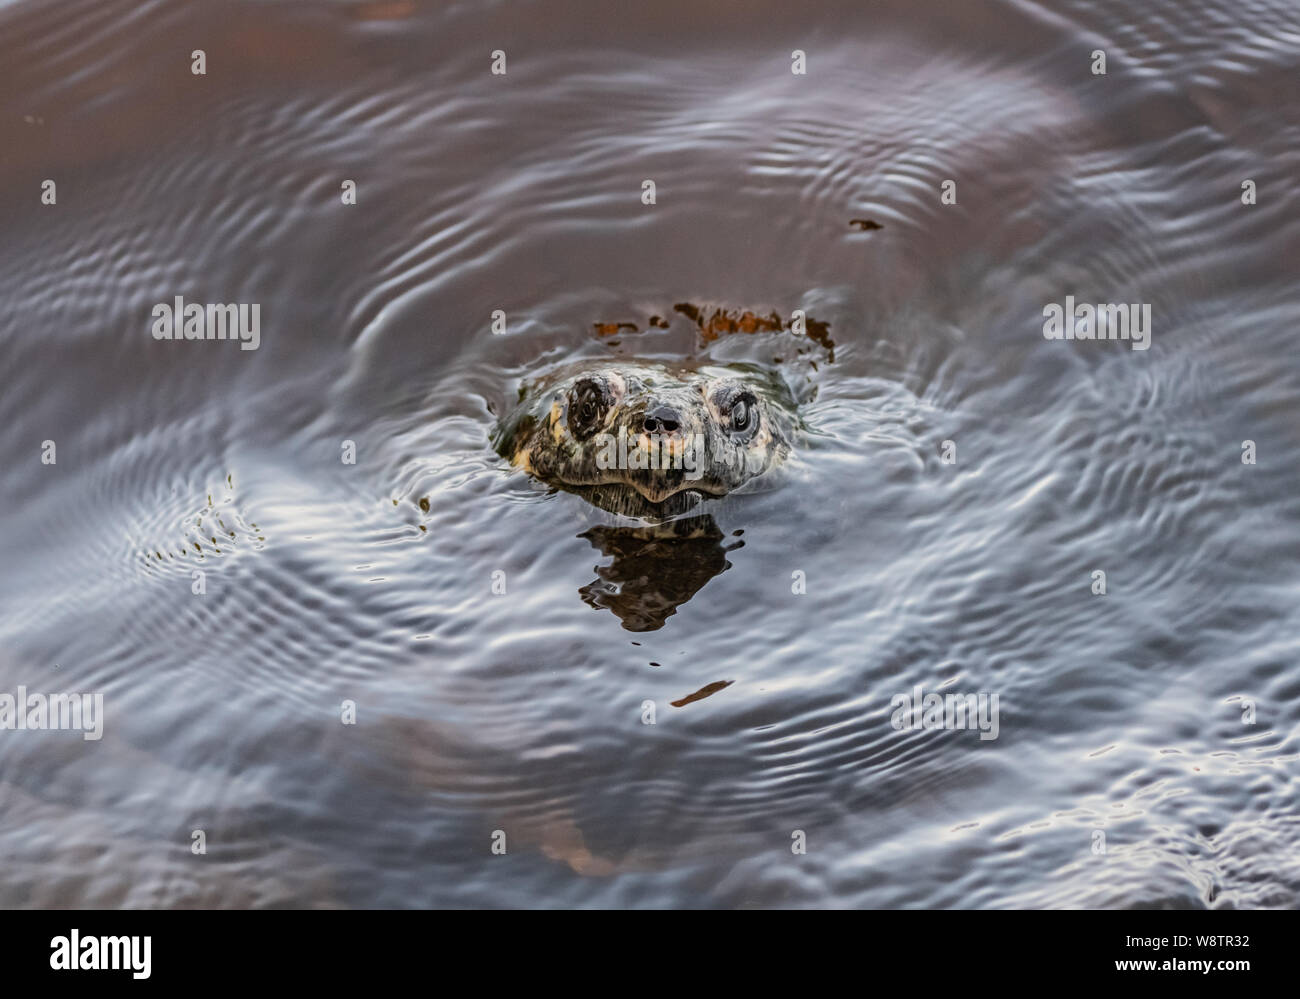 Snapping Turtle Breaks The Surface of dark water in lake Stock Photo